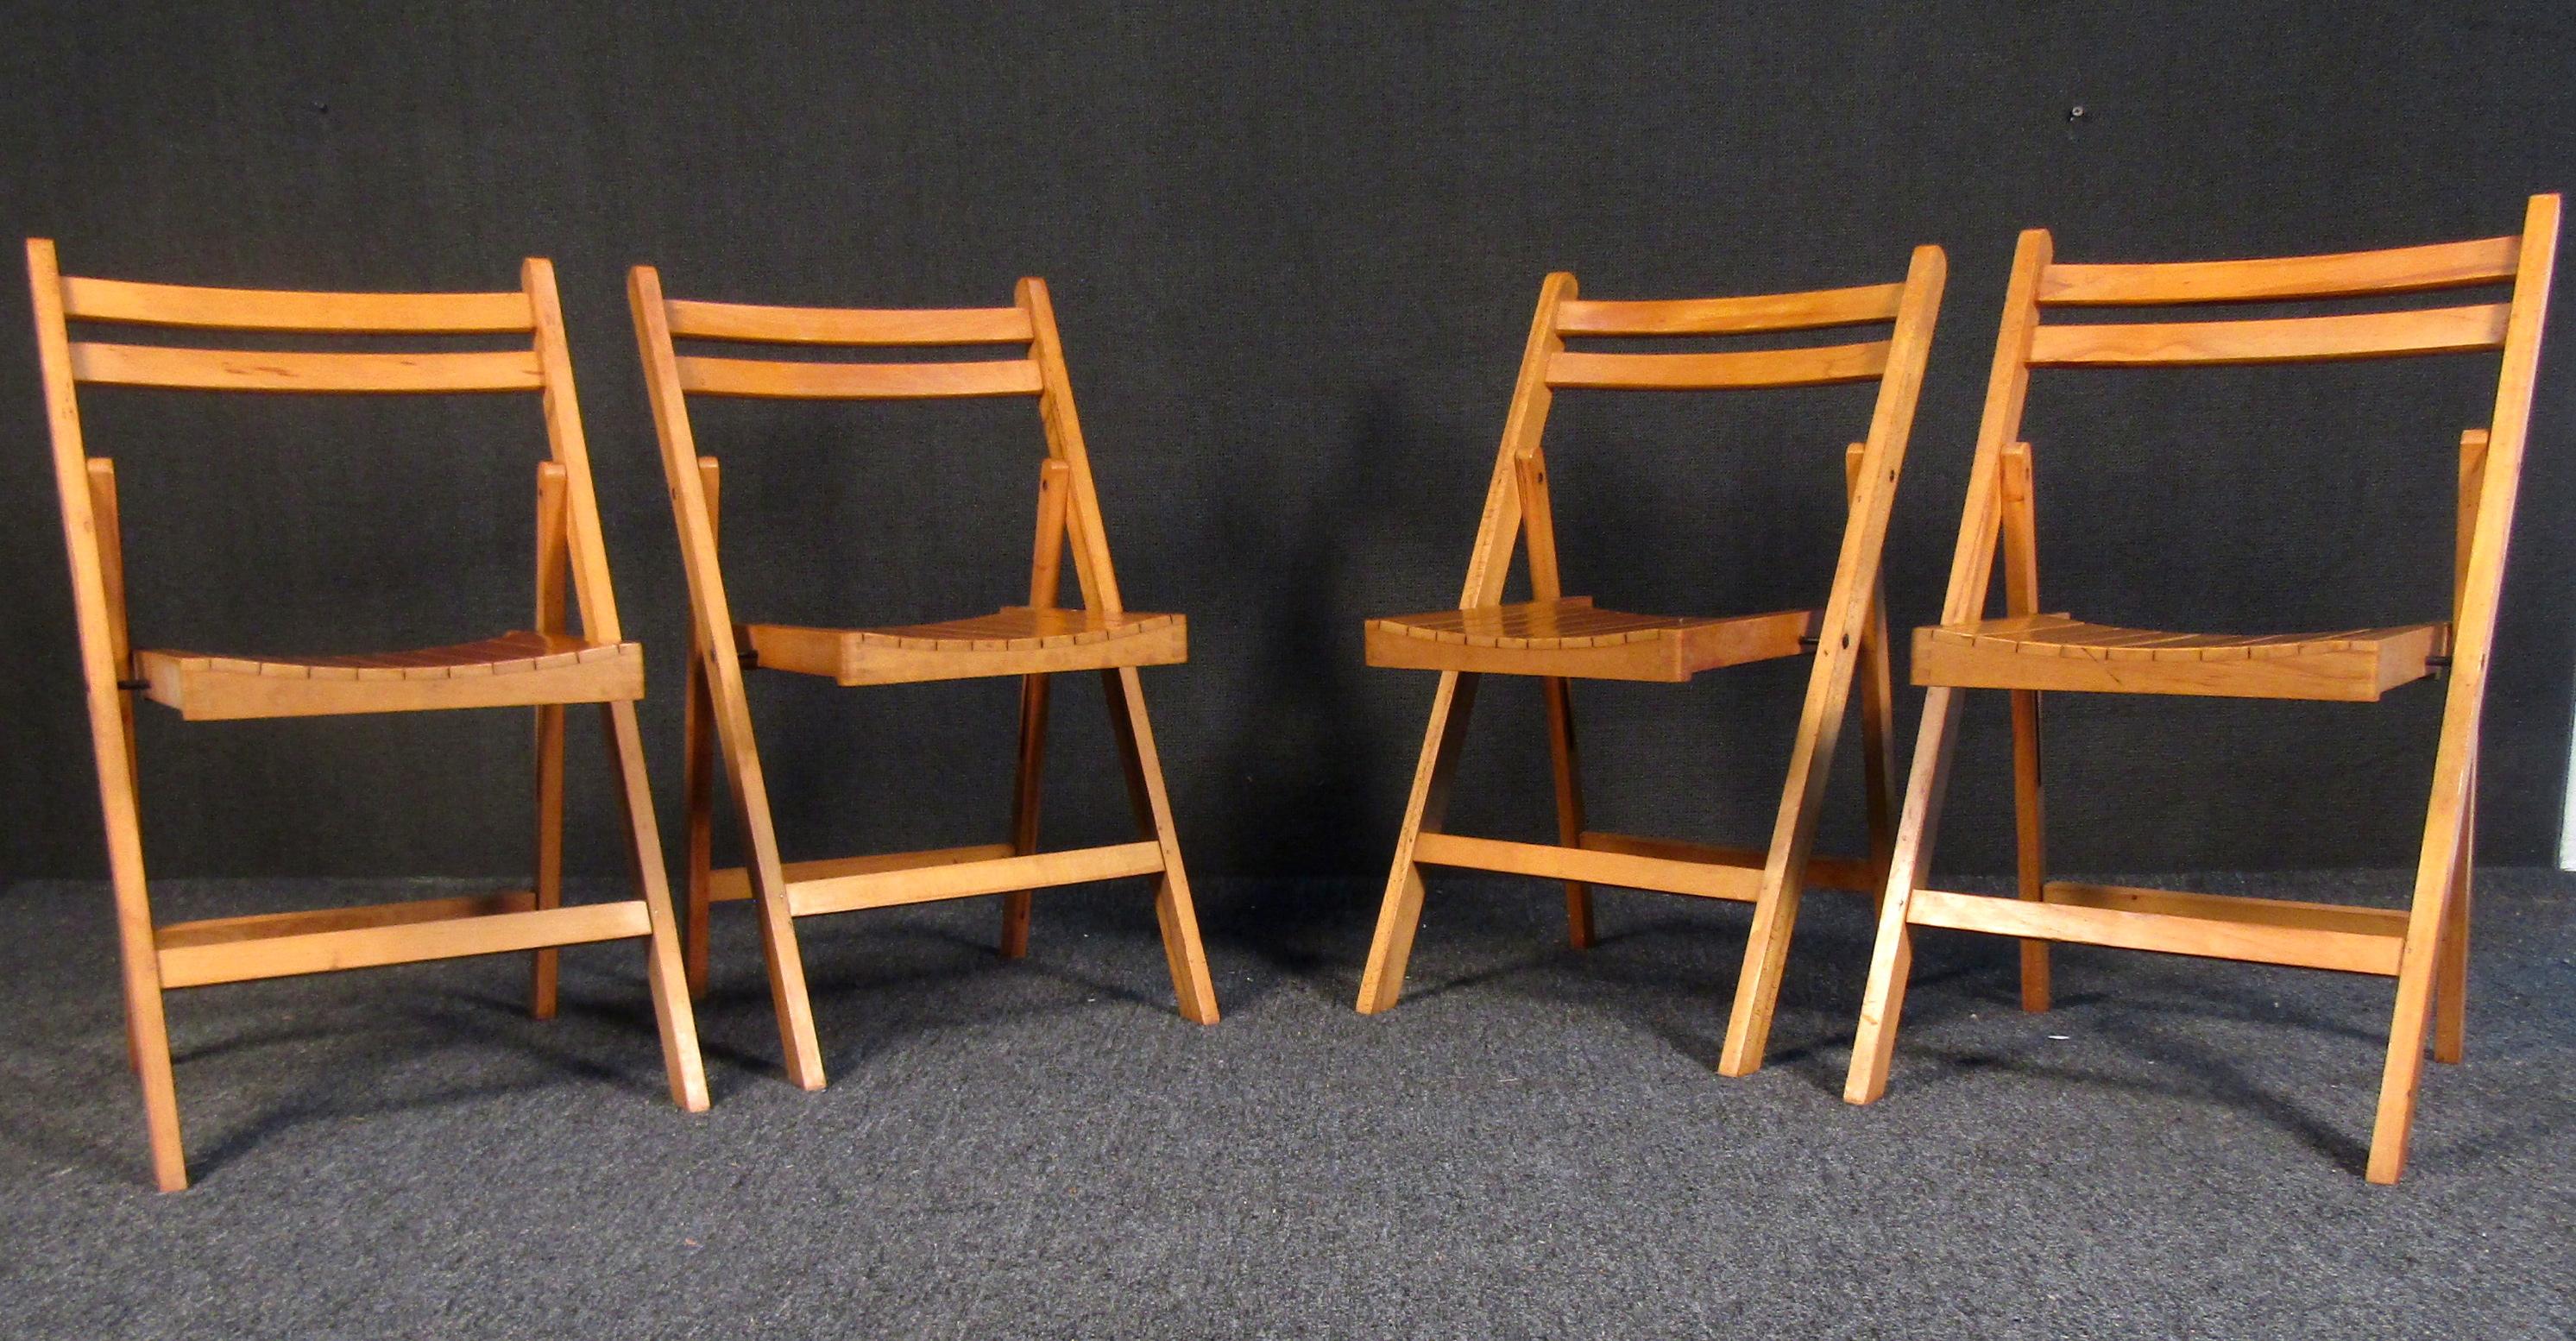 Set of 4 Mid-Century Modern wood folding chairs. Easy to store.

(Please confirm item location - NY or NJ - with dealer).